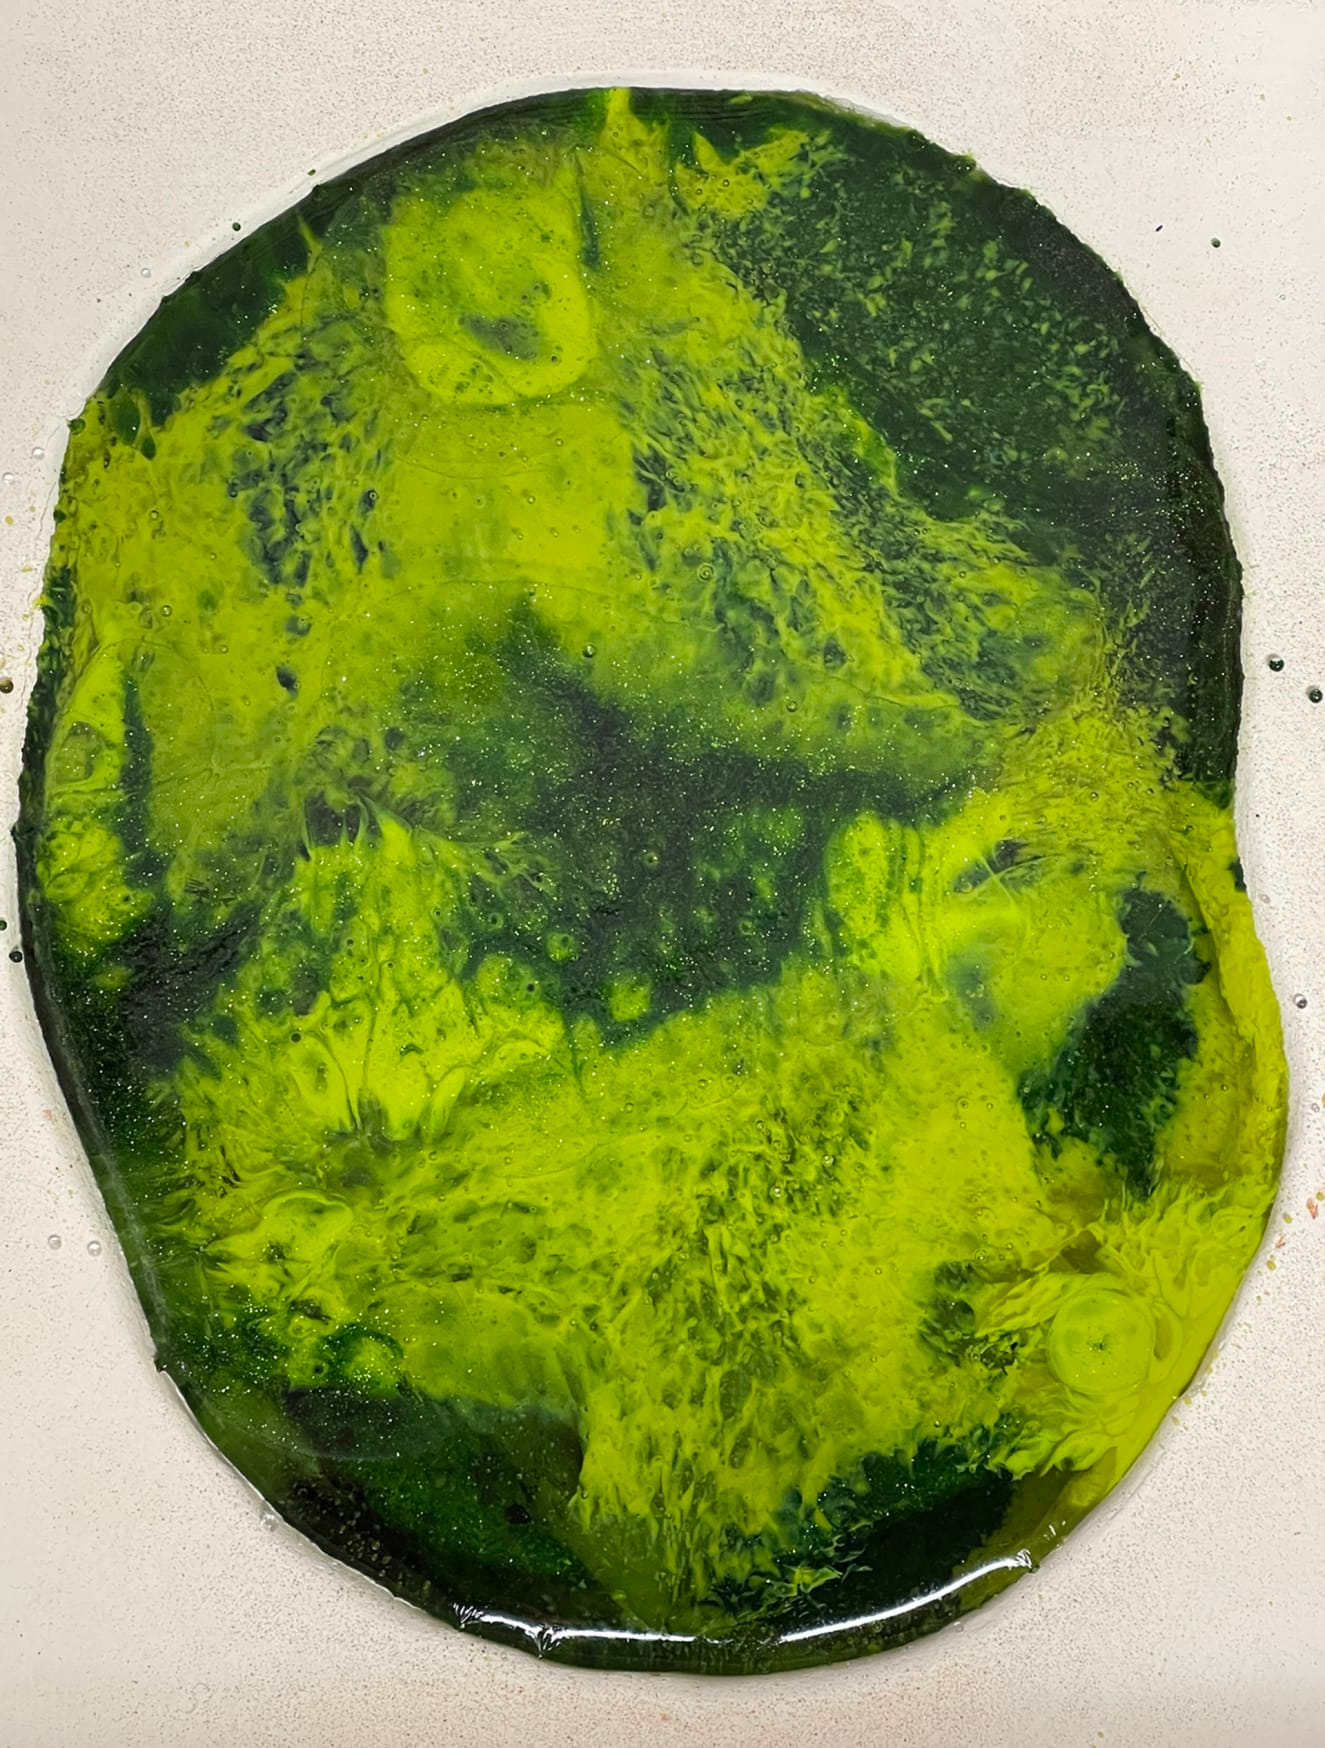 Image of a rounded blob consisting of shades of green.